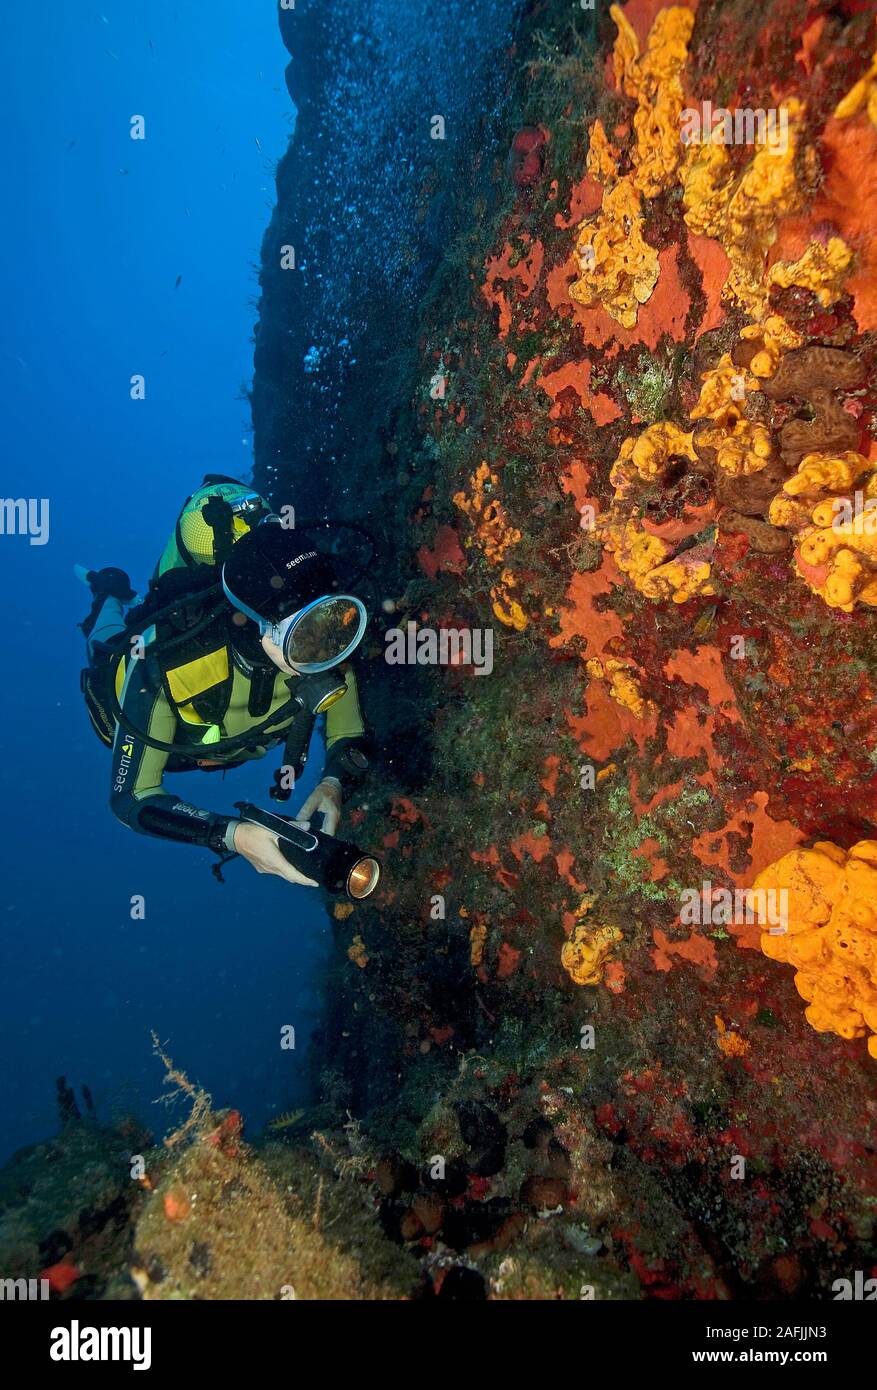 Scuba diver at a rocky reef with red mediteranean sponges (Spirastrellidae), Bodrum, Turkey Stock Photo